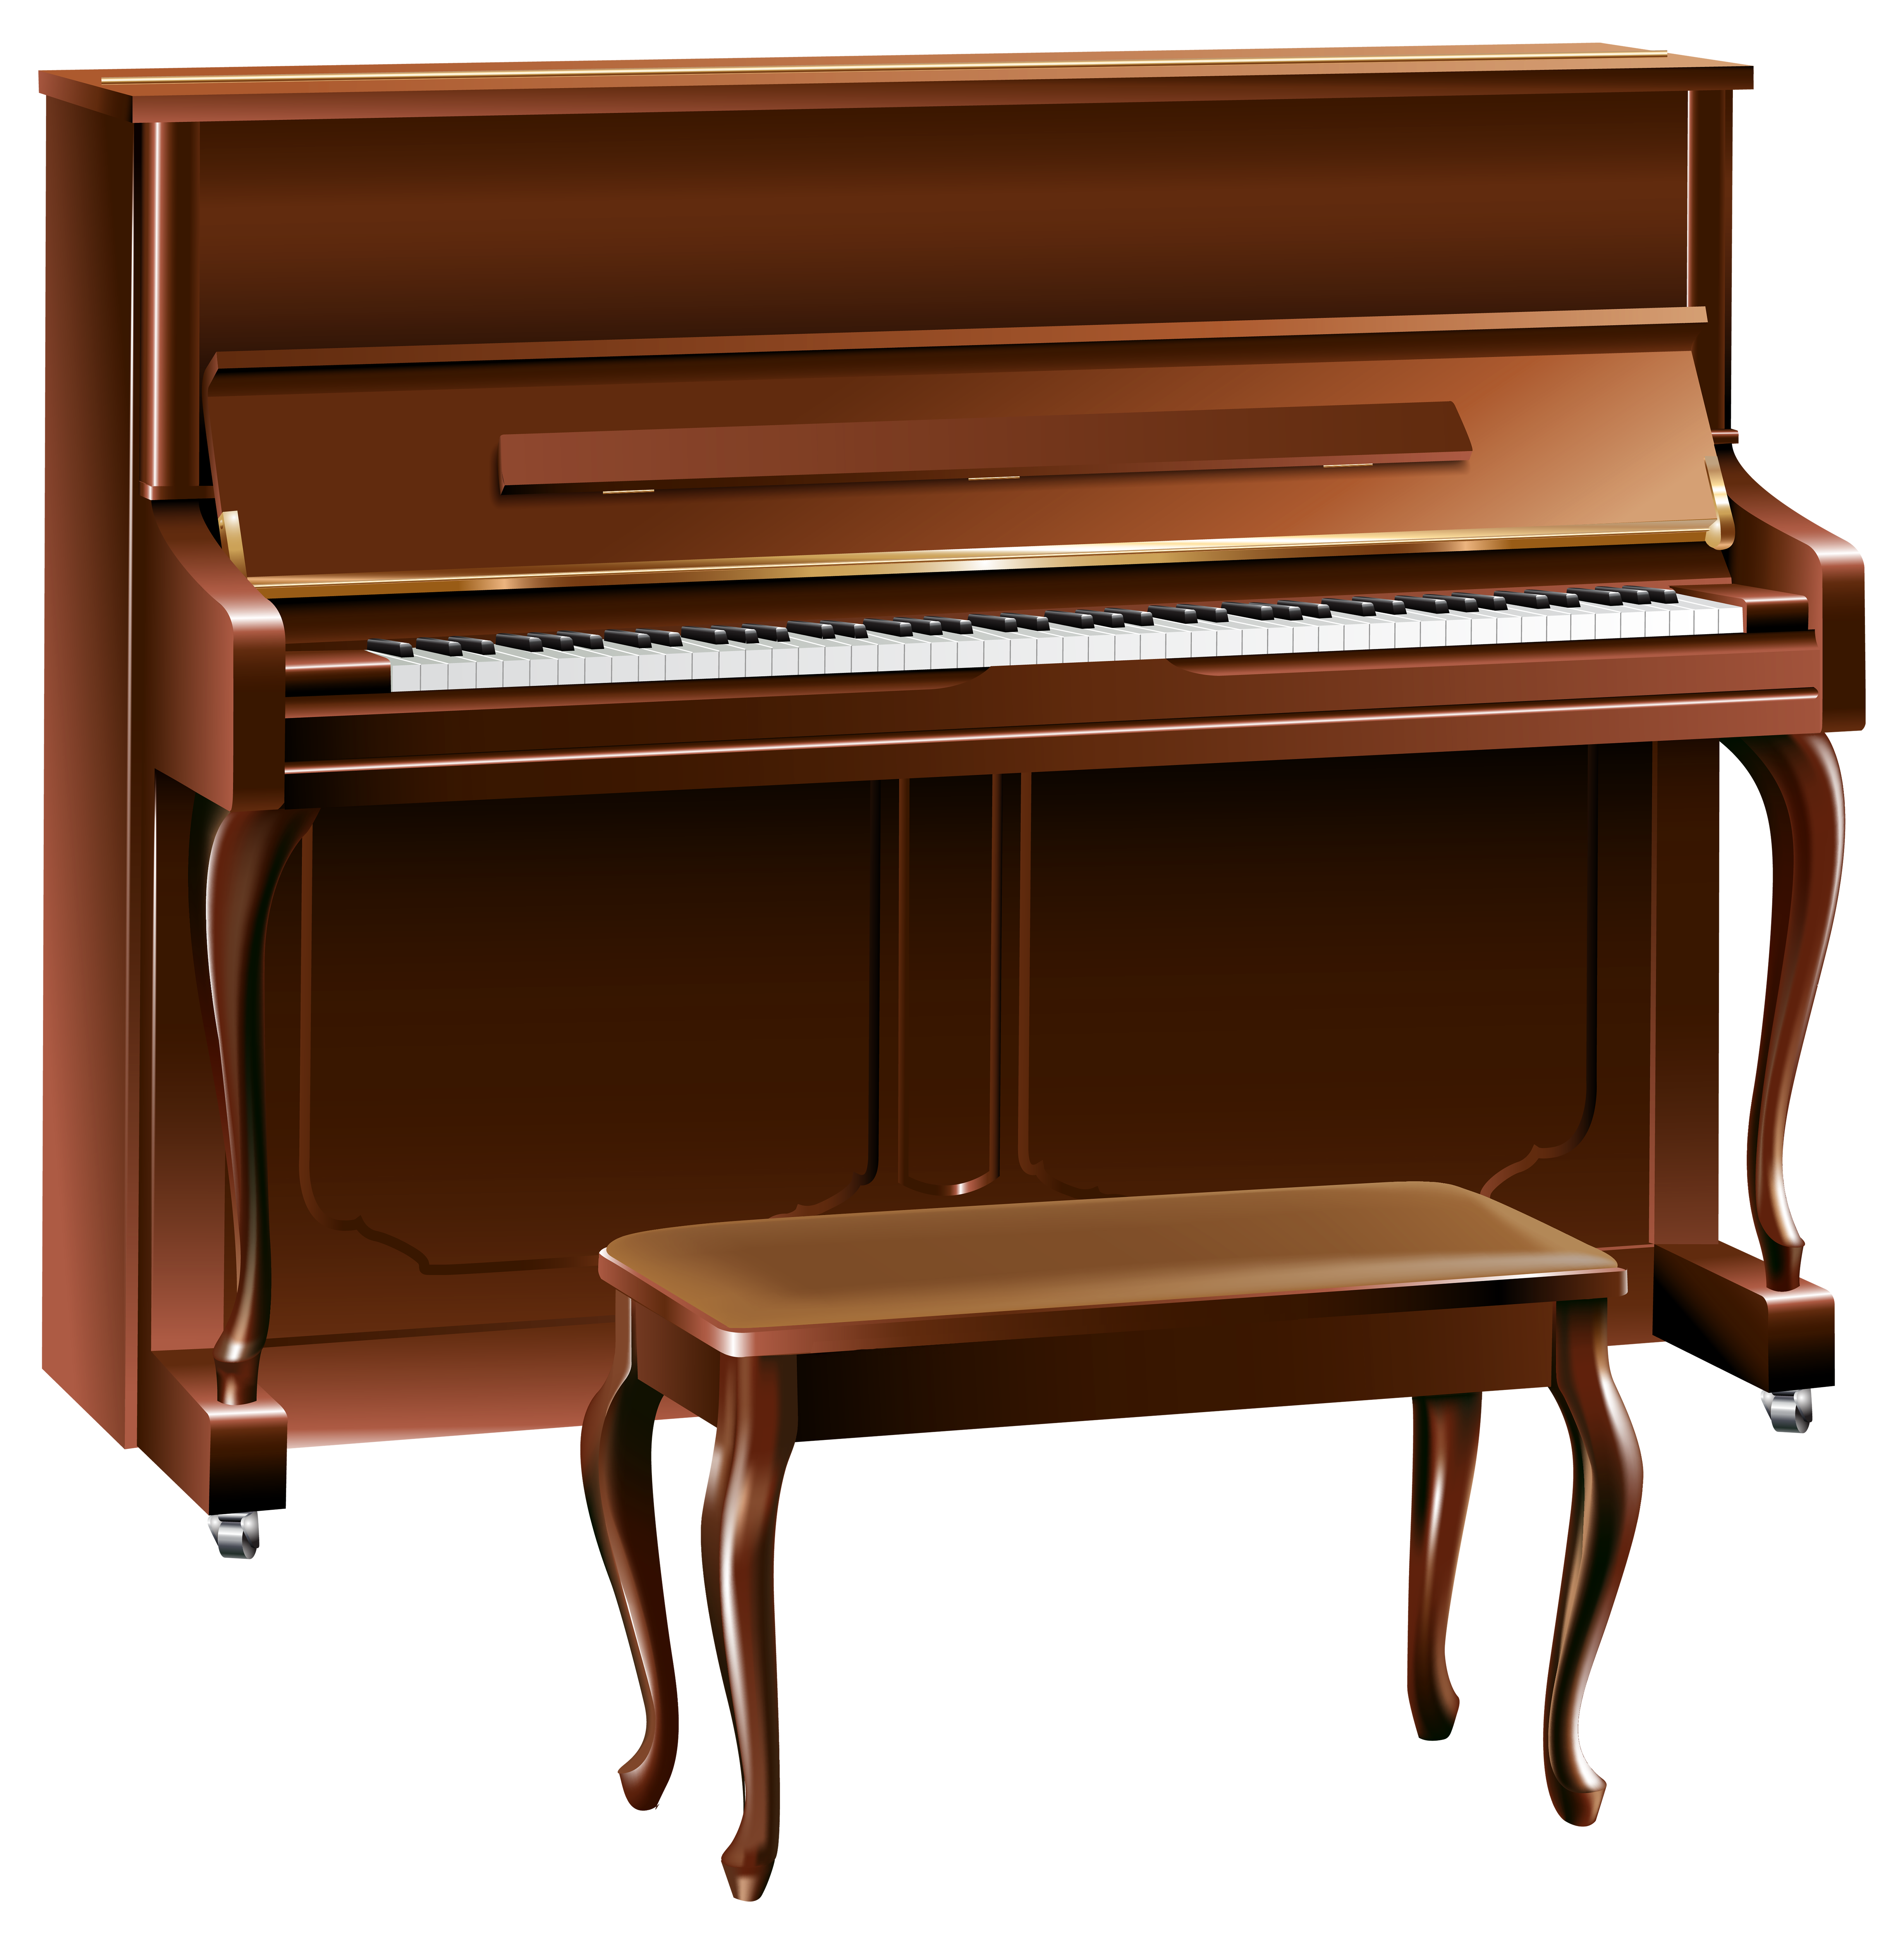 Piano clip art free vector in open office drawing svg svg 3 2